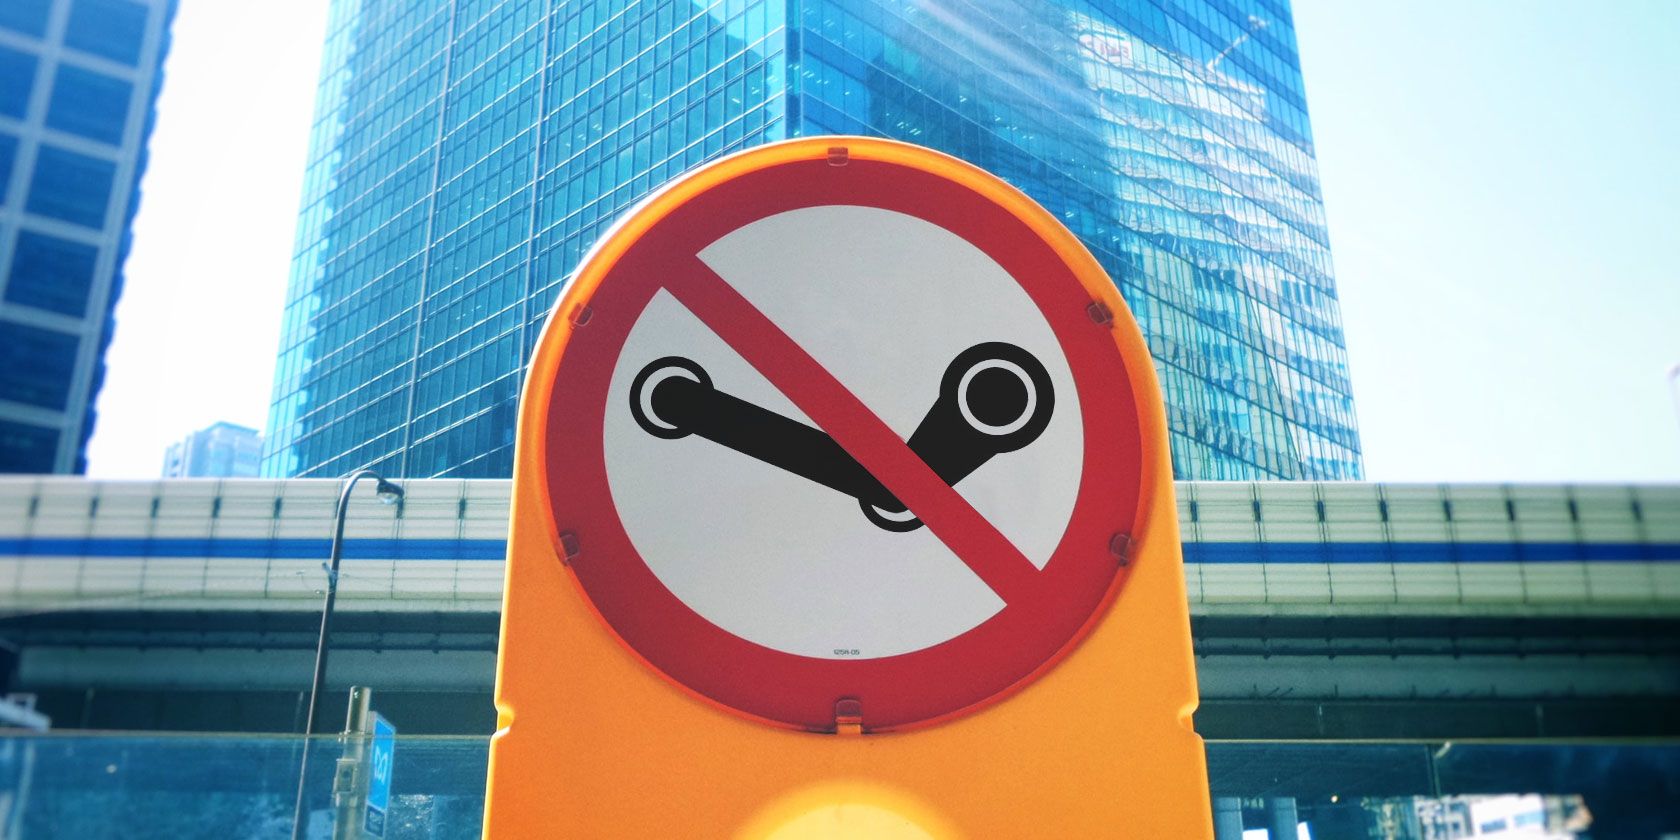 steam how to stop workshop downloads